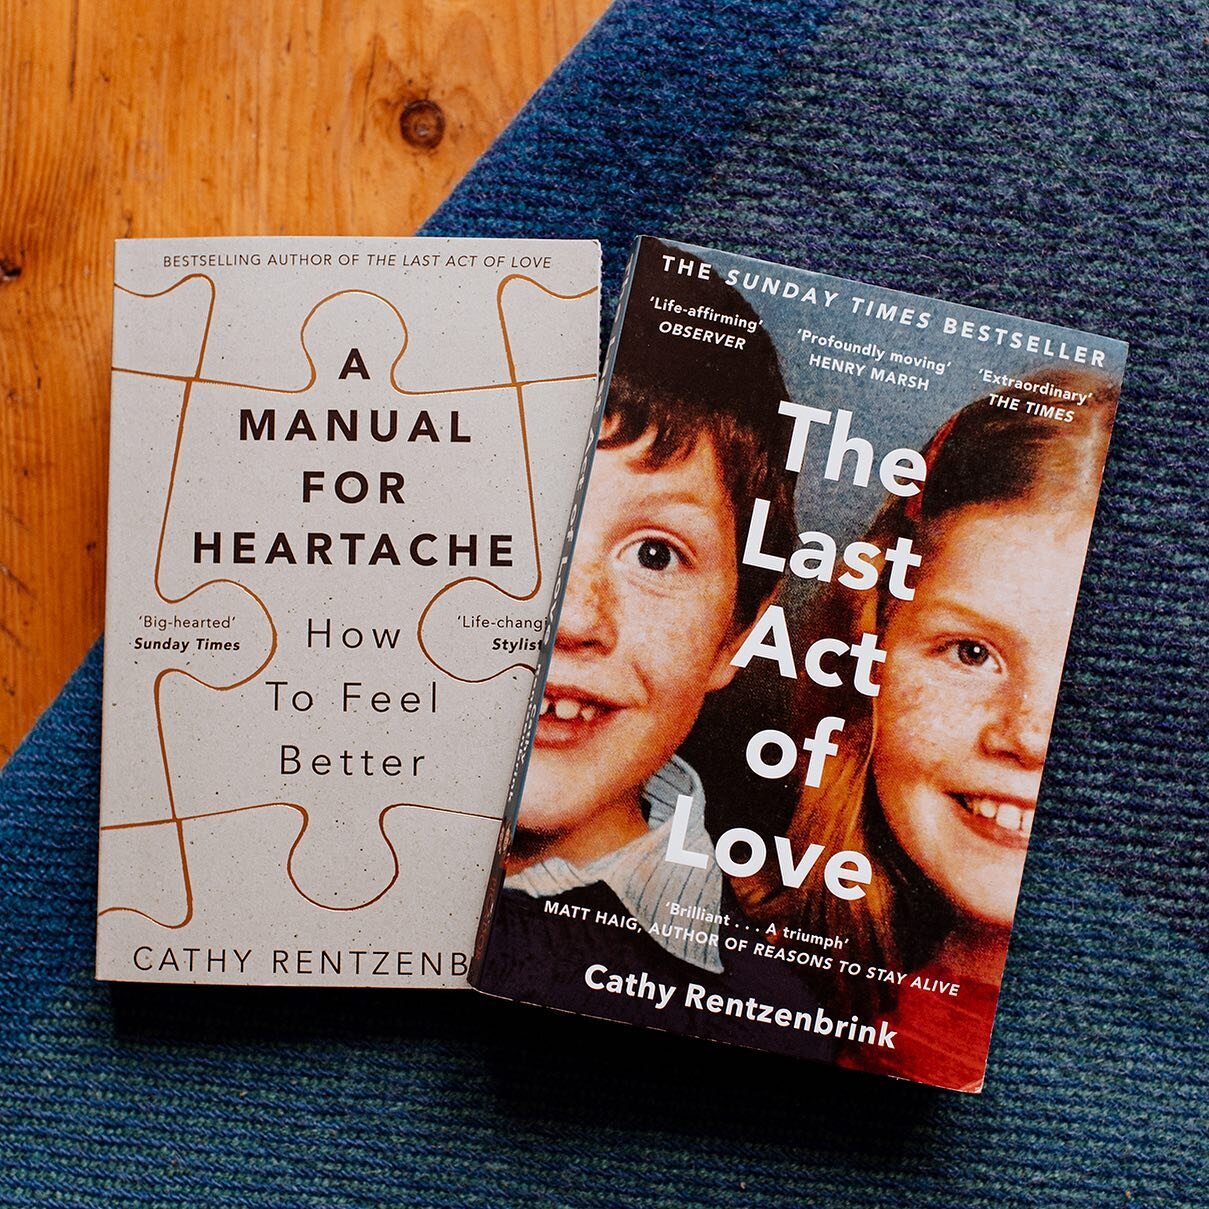 Cathy&rsquo;s brother was hit by a car when he was 16 and never walked or spoke again. Eight years later he died.

&lsquo;The Last Act of Love&rsquo; is the story of what happened. And where Cathy wrestled her&nbsp;pain onto the page. &lsquo;A Manual